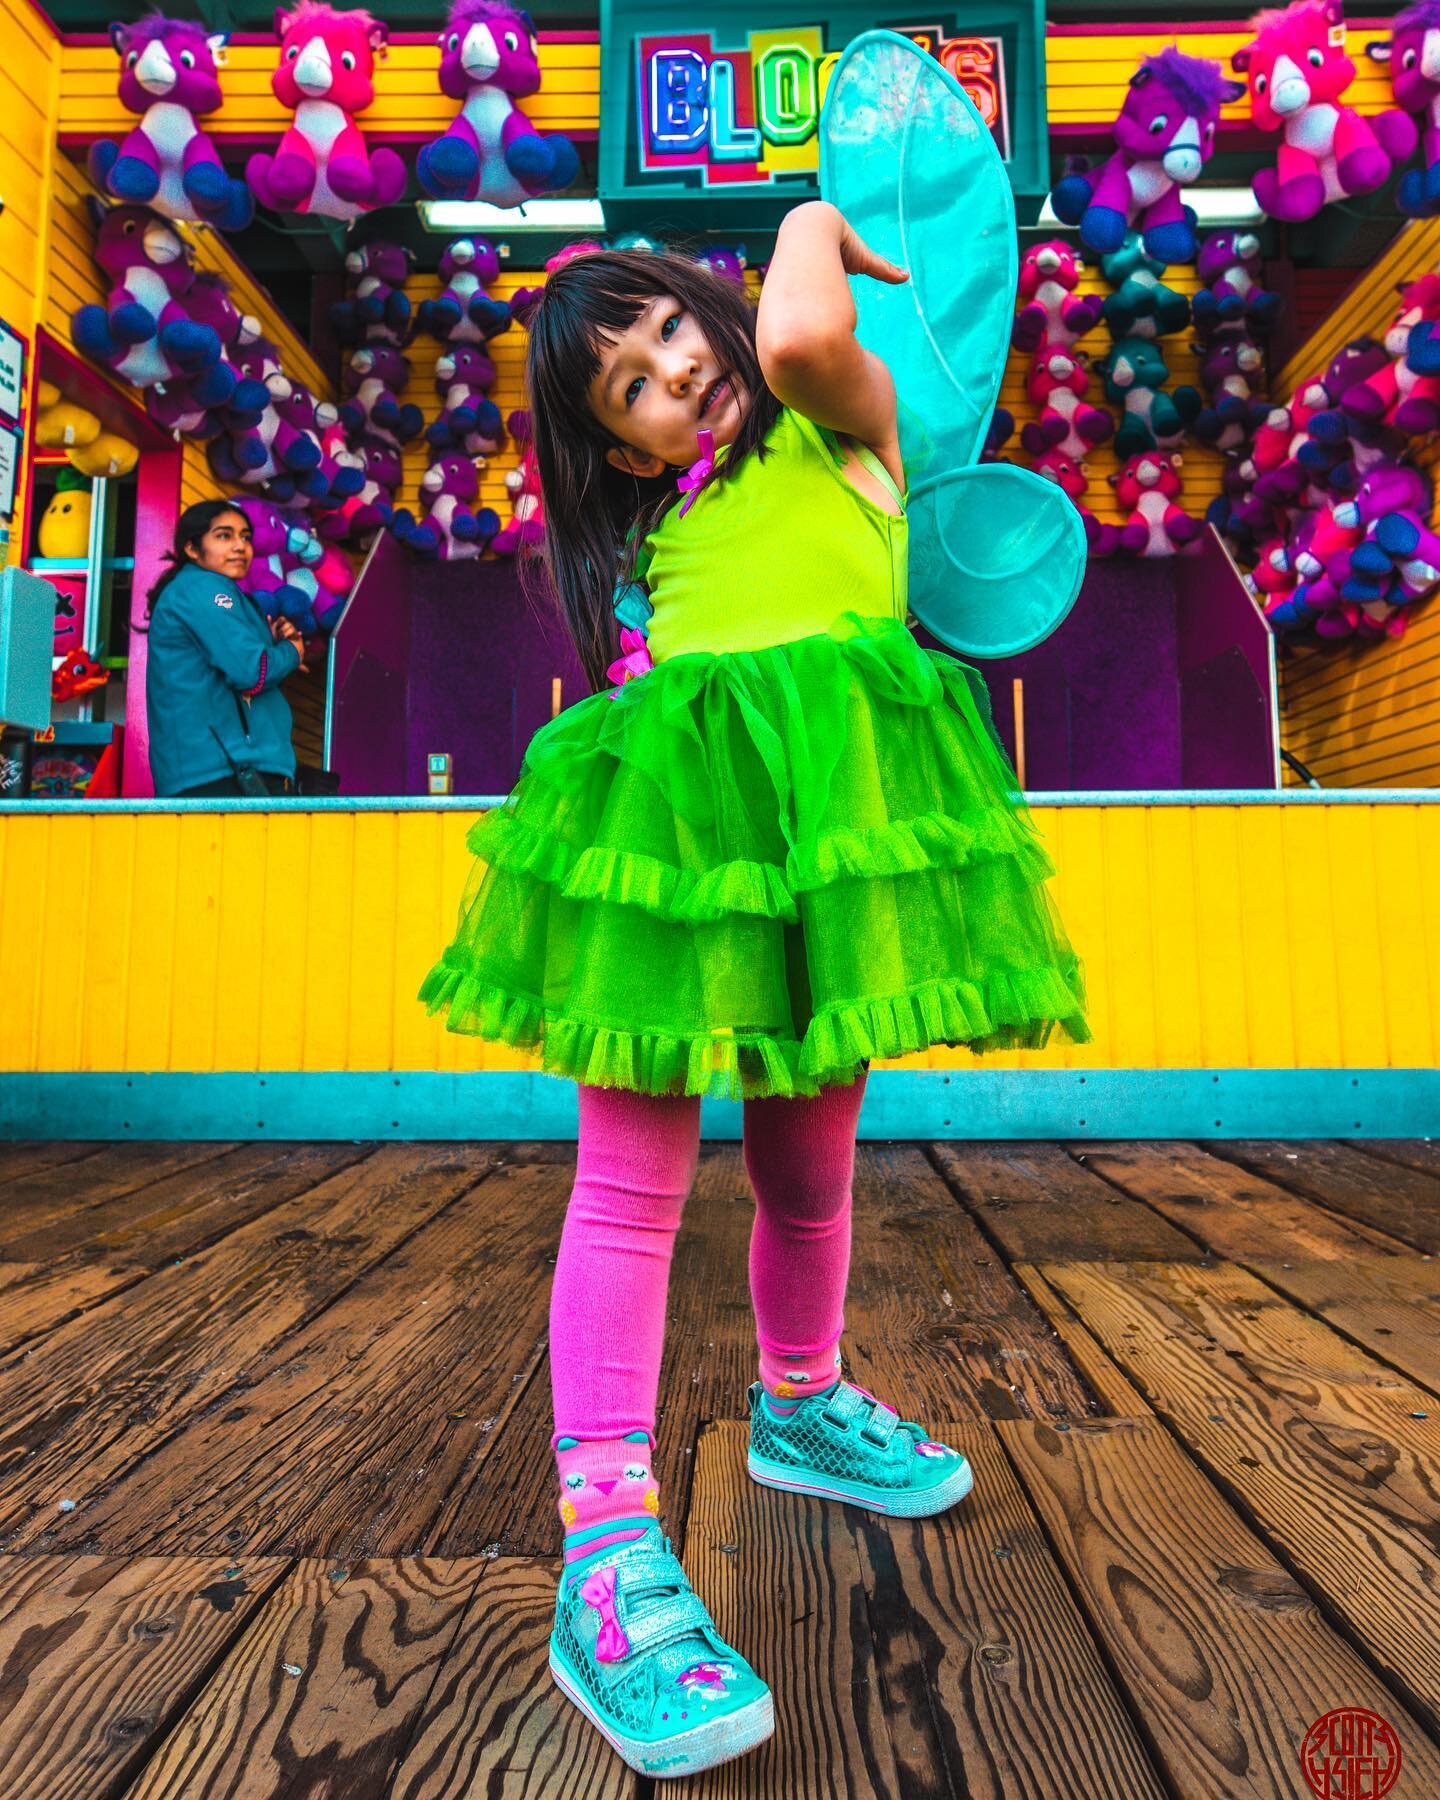 **DOUBLE TAP** This was such a fun shoot with Seven and @mommystinyplanet 
I love the colors and check out her stances. 📸: @syhphotography @scotty.hsieh
🎎wardrobe : she picked it out herself
.
.
.
.
#photography #photooftheday #photo #photographer 